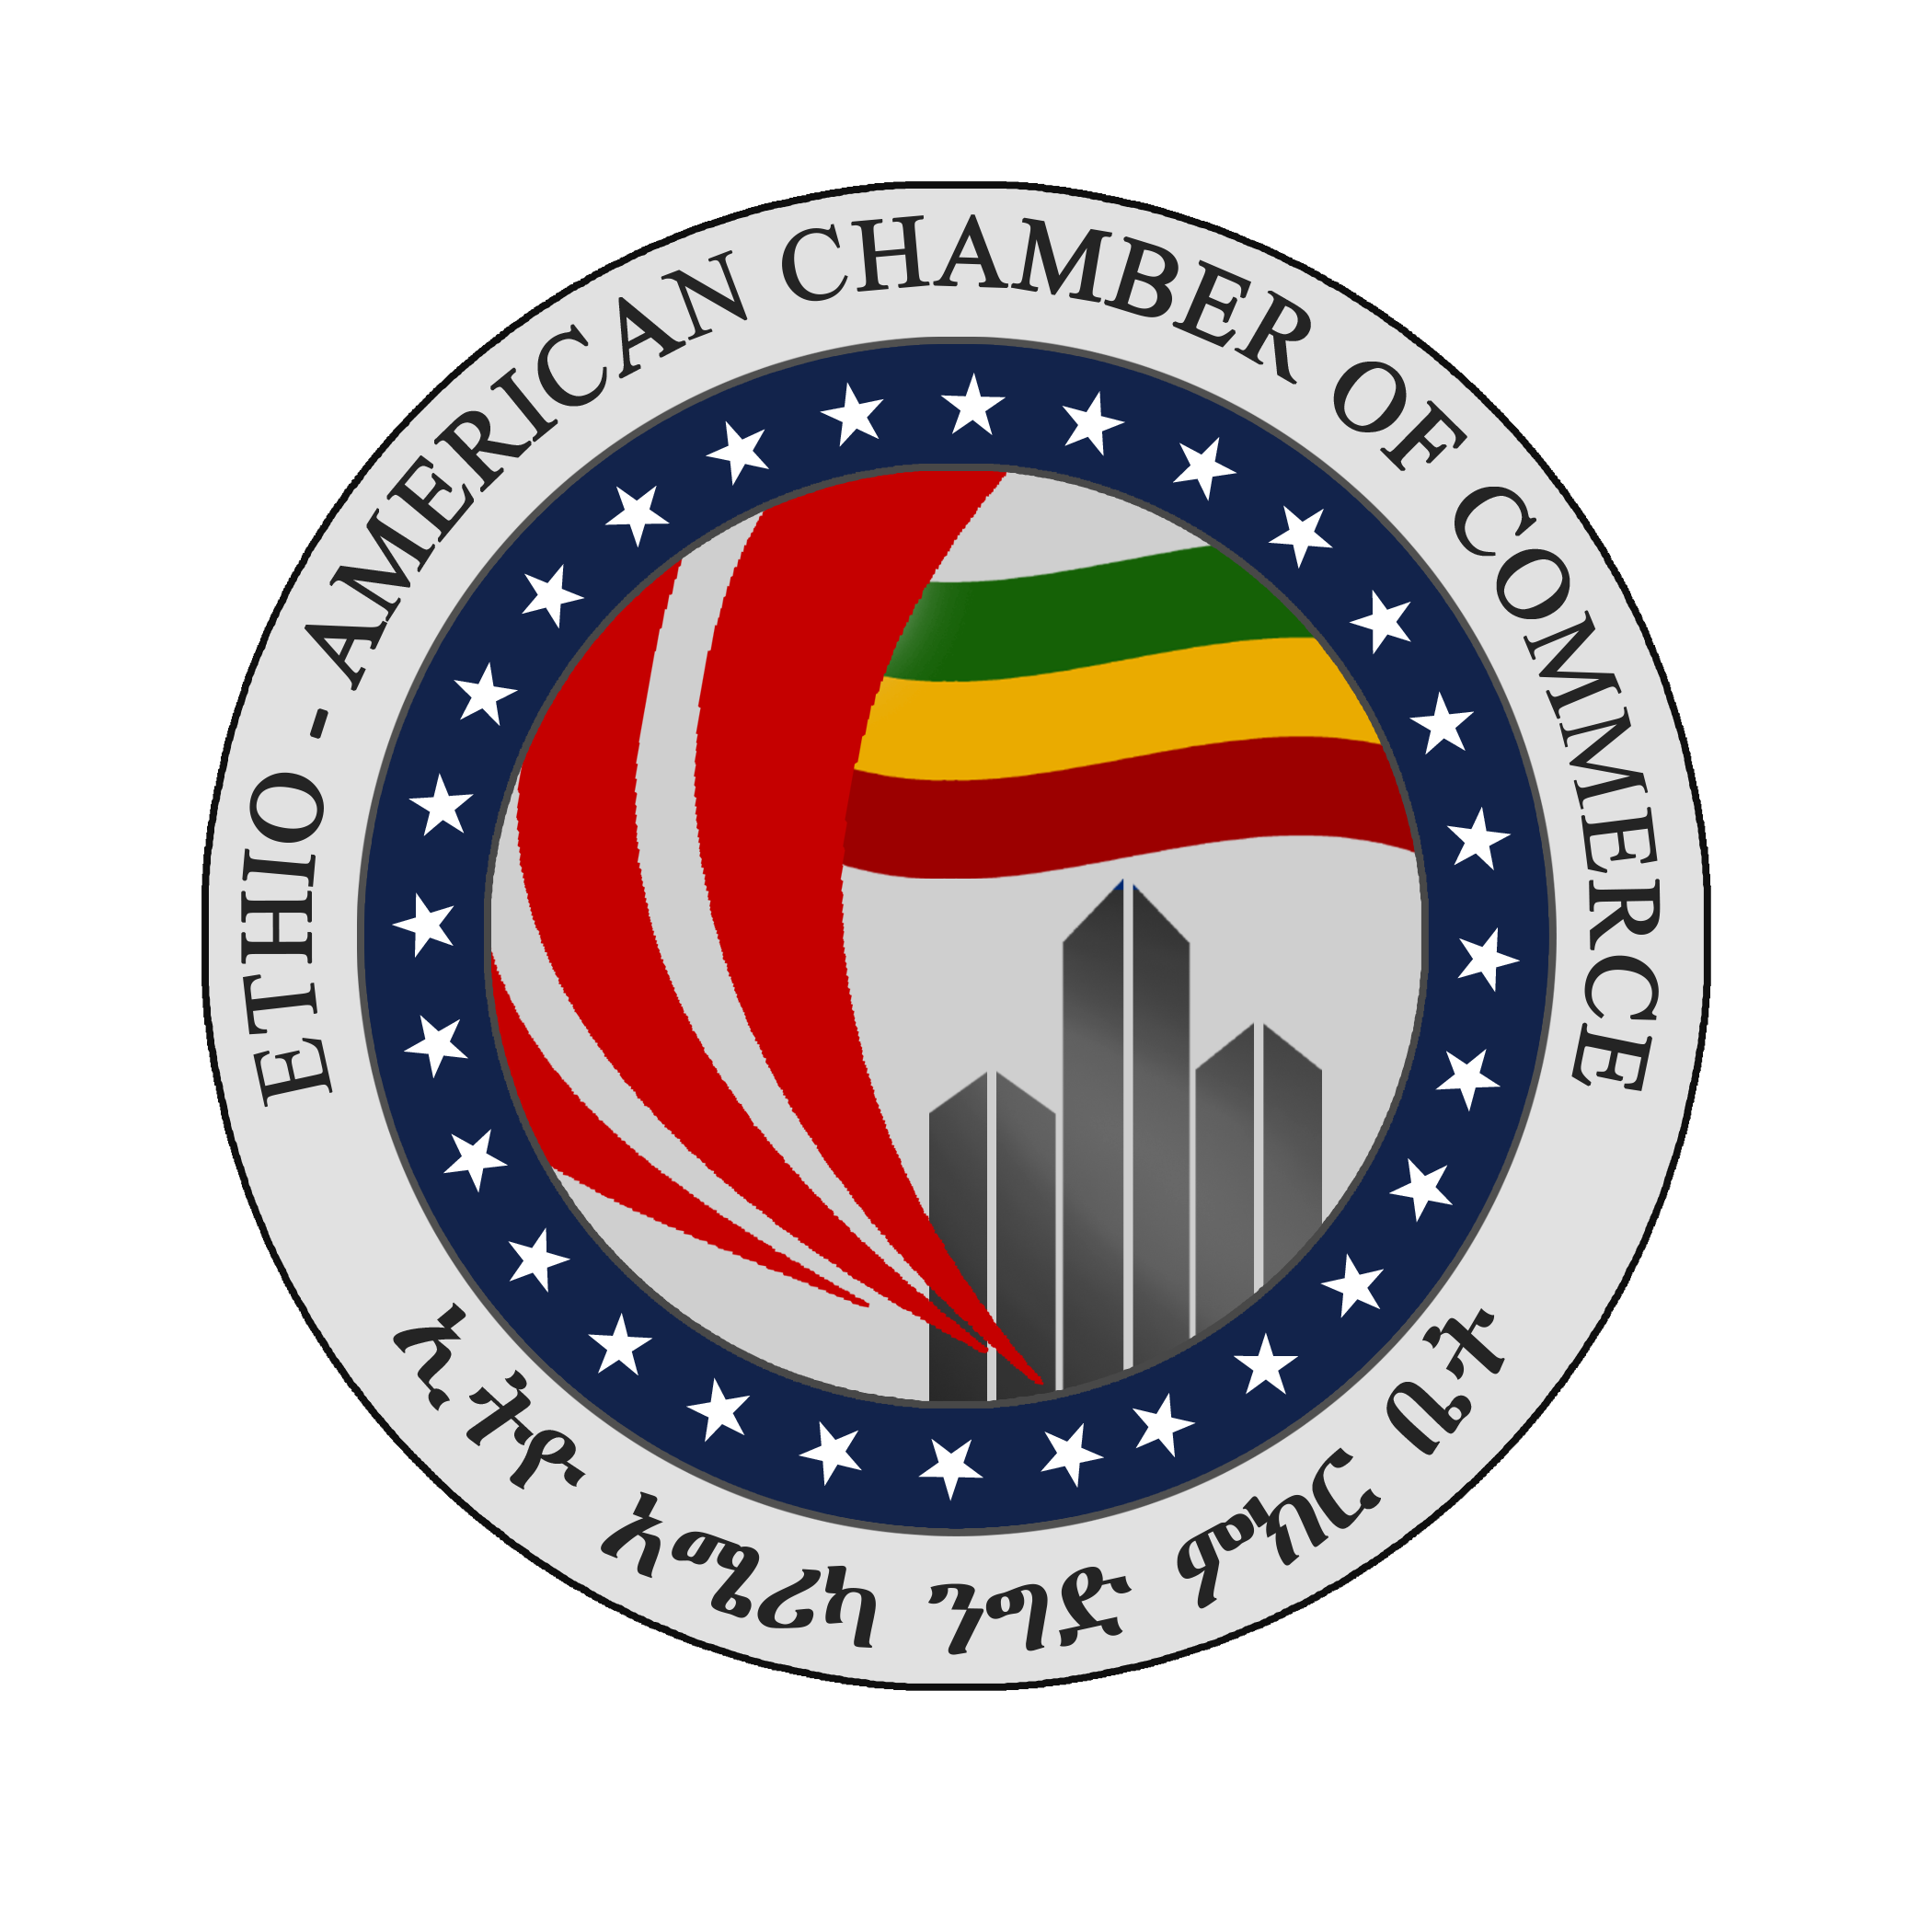 EACC is established to strengthen and expand the Ethio-American Business Community and aims to make it competitive, strong and vibrant.